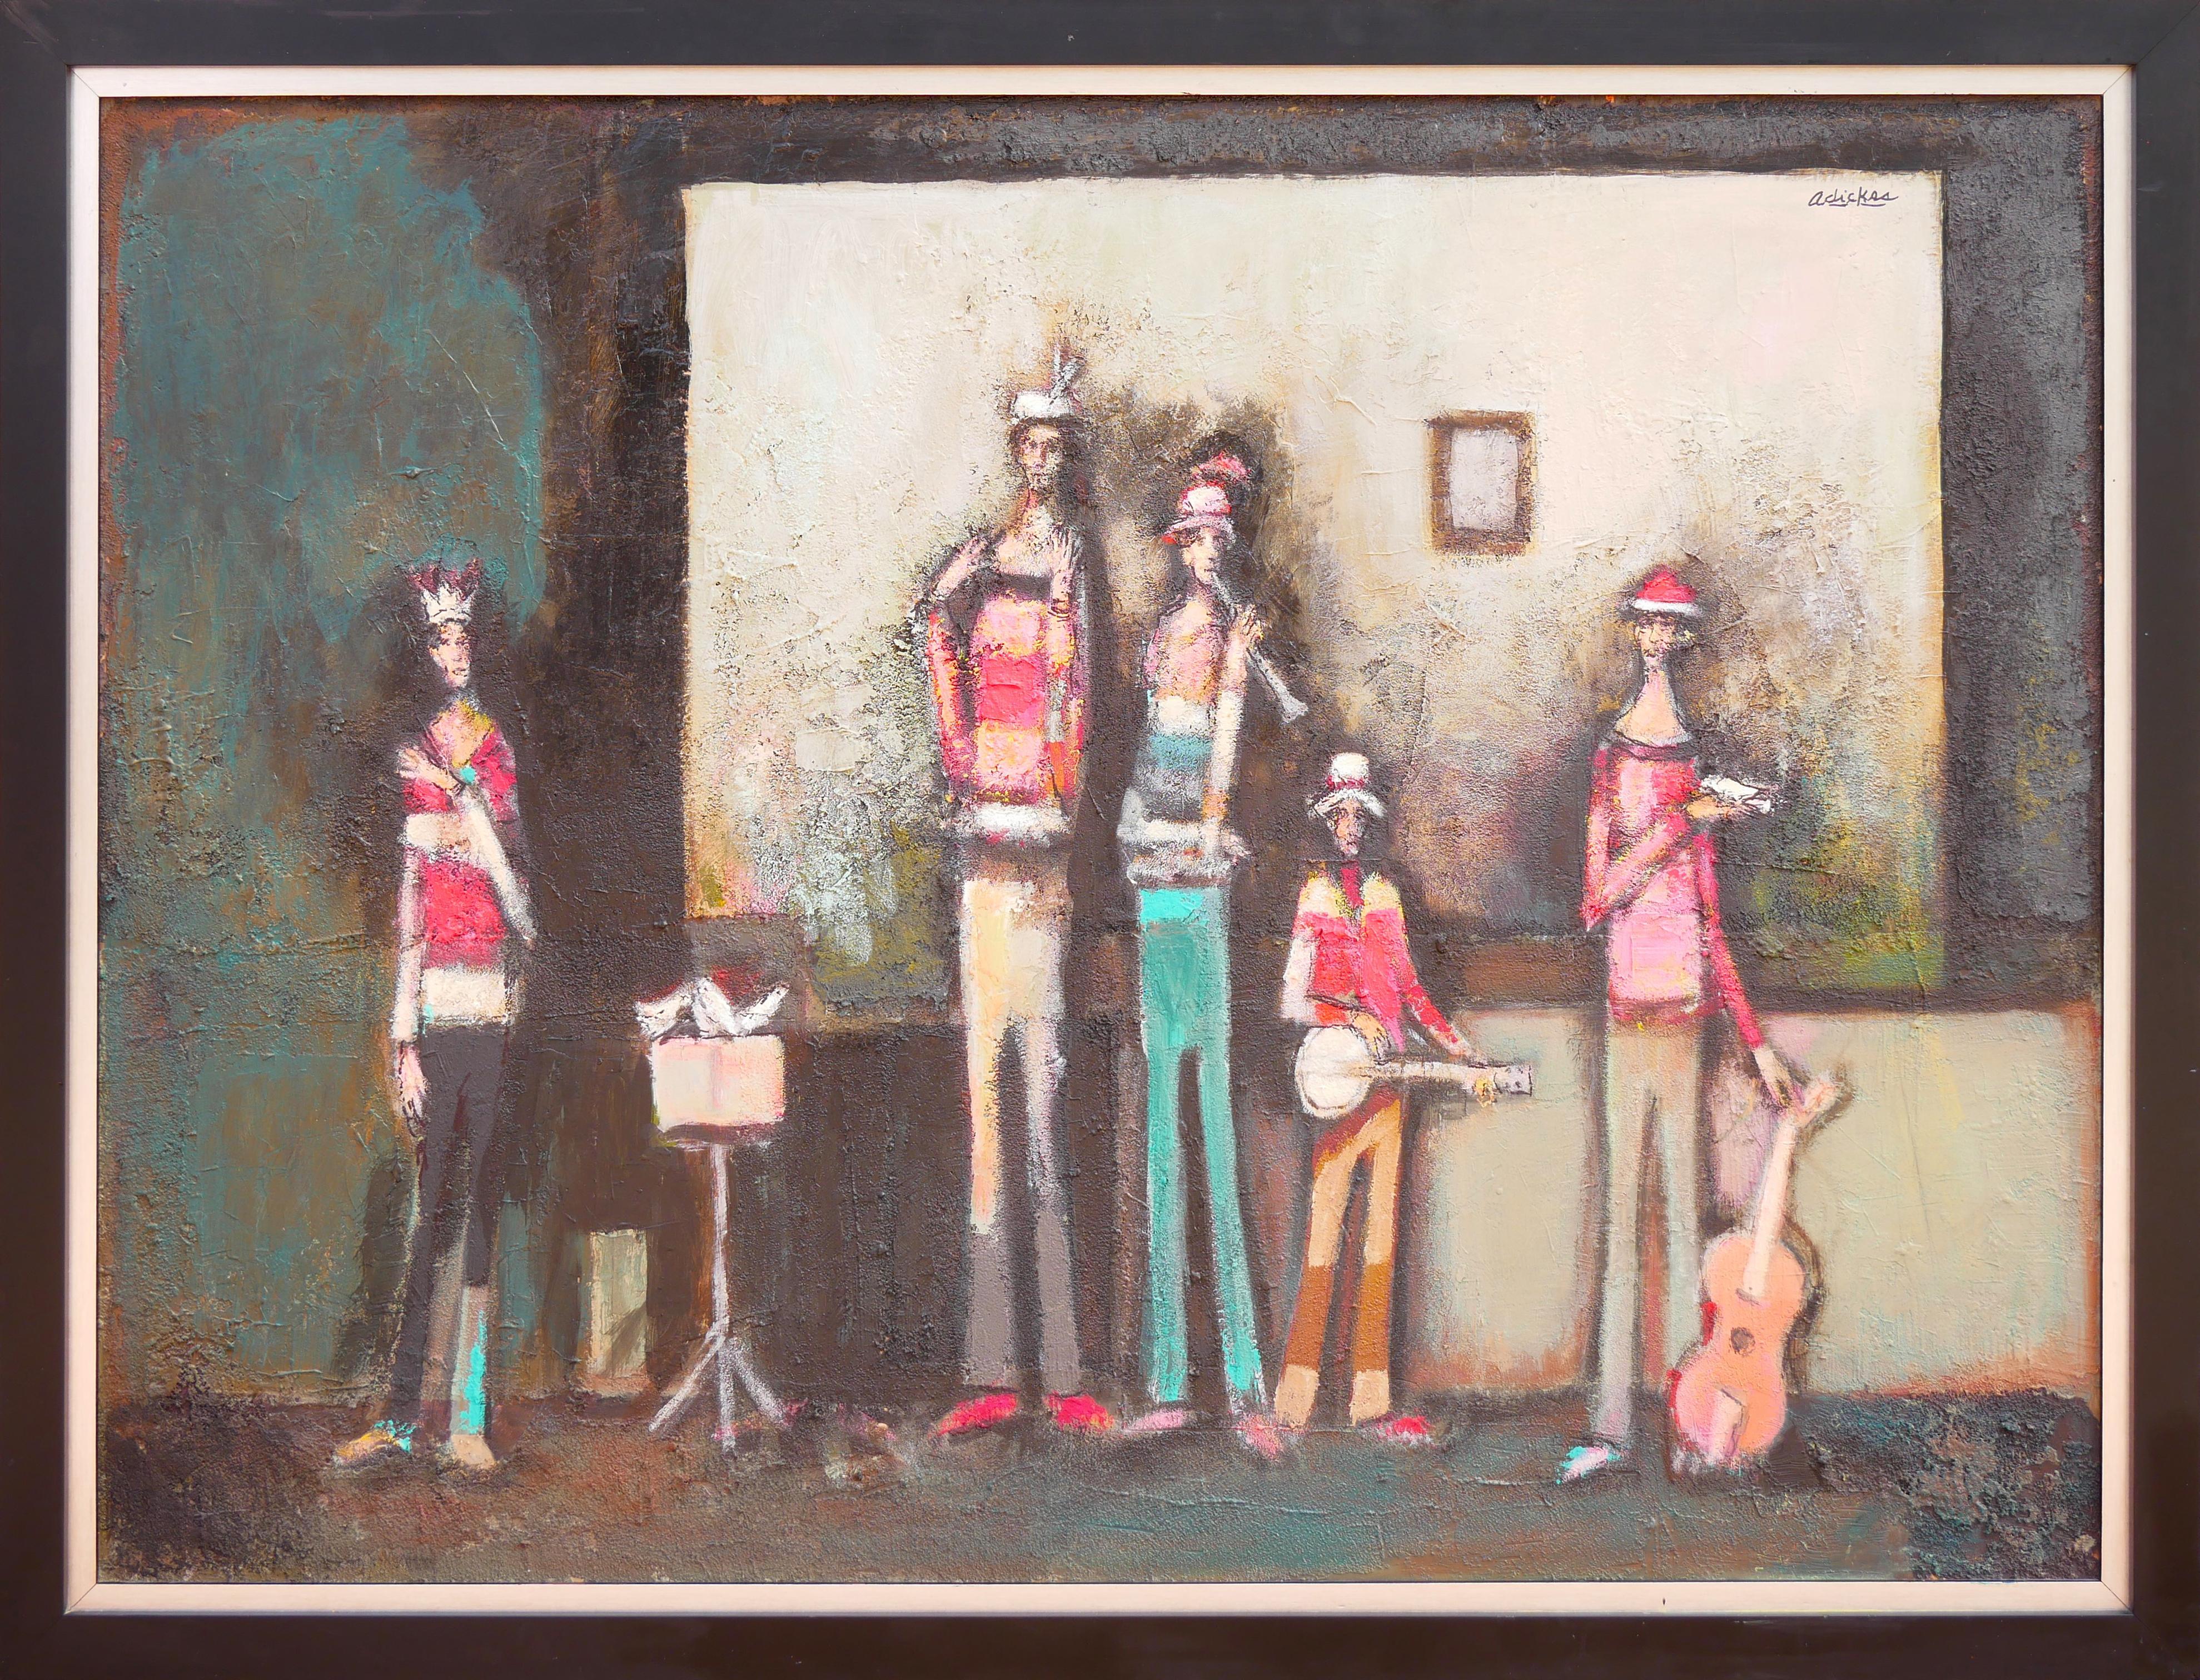 David Adickes Figurative Painting - "Five-Man Band" Modern Abstract Colorful Figurative Group Portrait Painting 